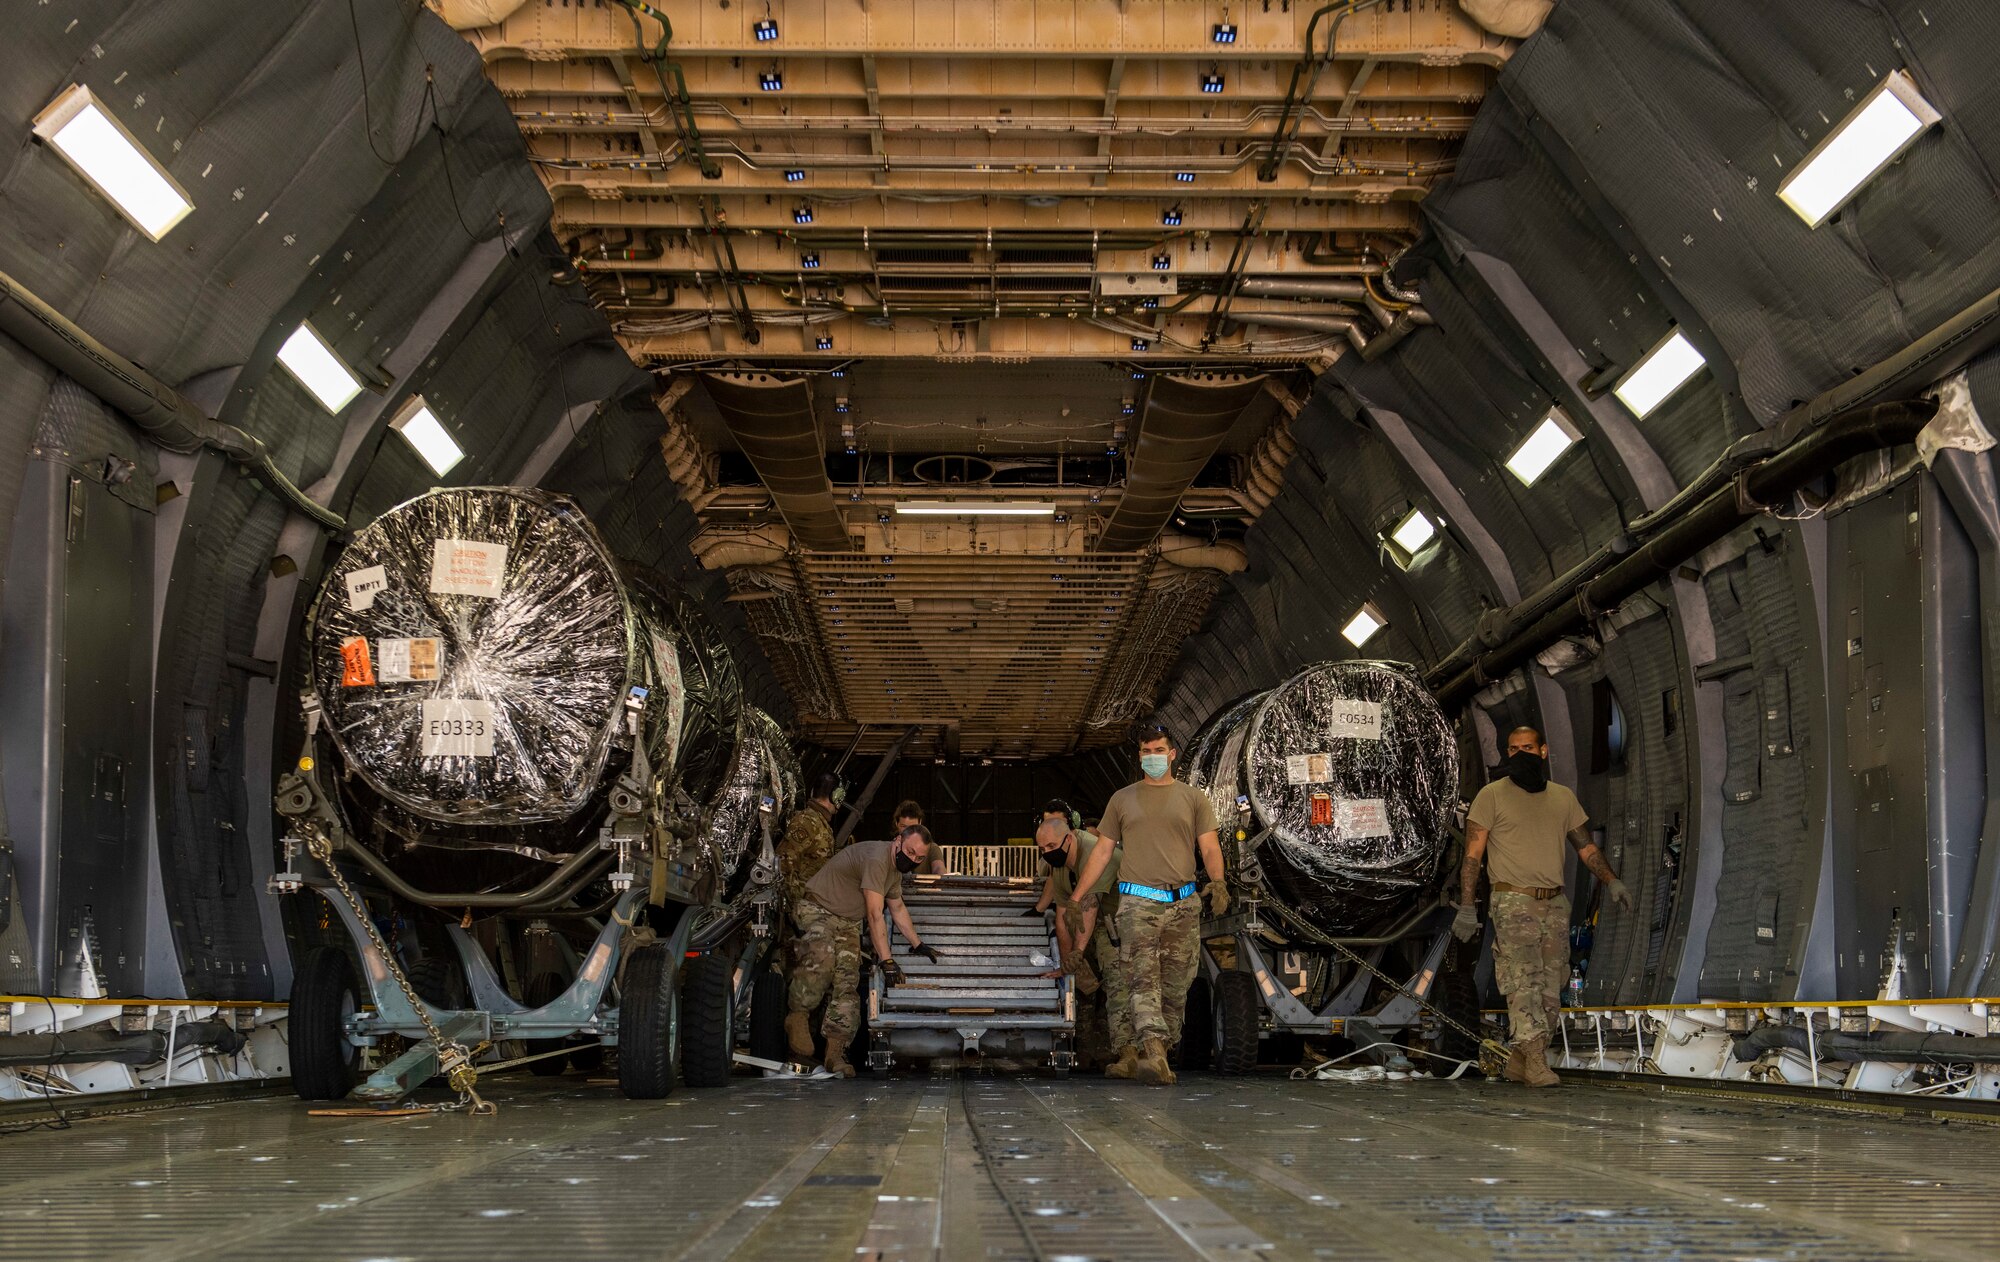 Airmen assigned to the 7th Logistics Readiness Squadron air transportation function prepare to unload cargo at Dyess Air Force Base, Texas, Nov. 25, 2020.